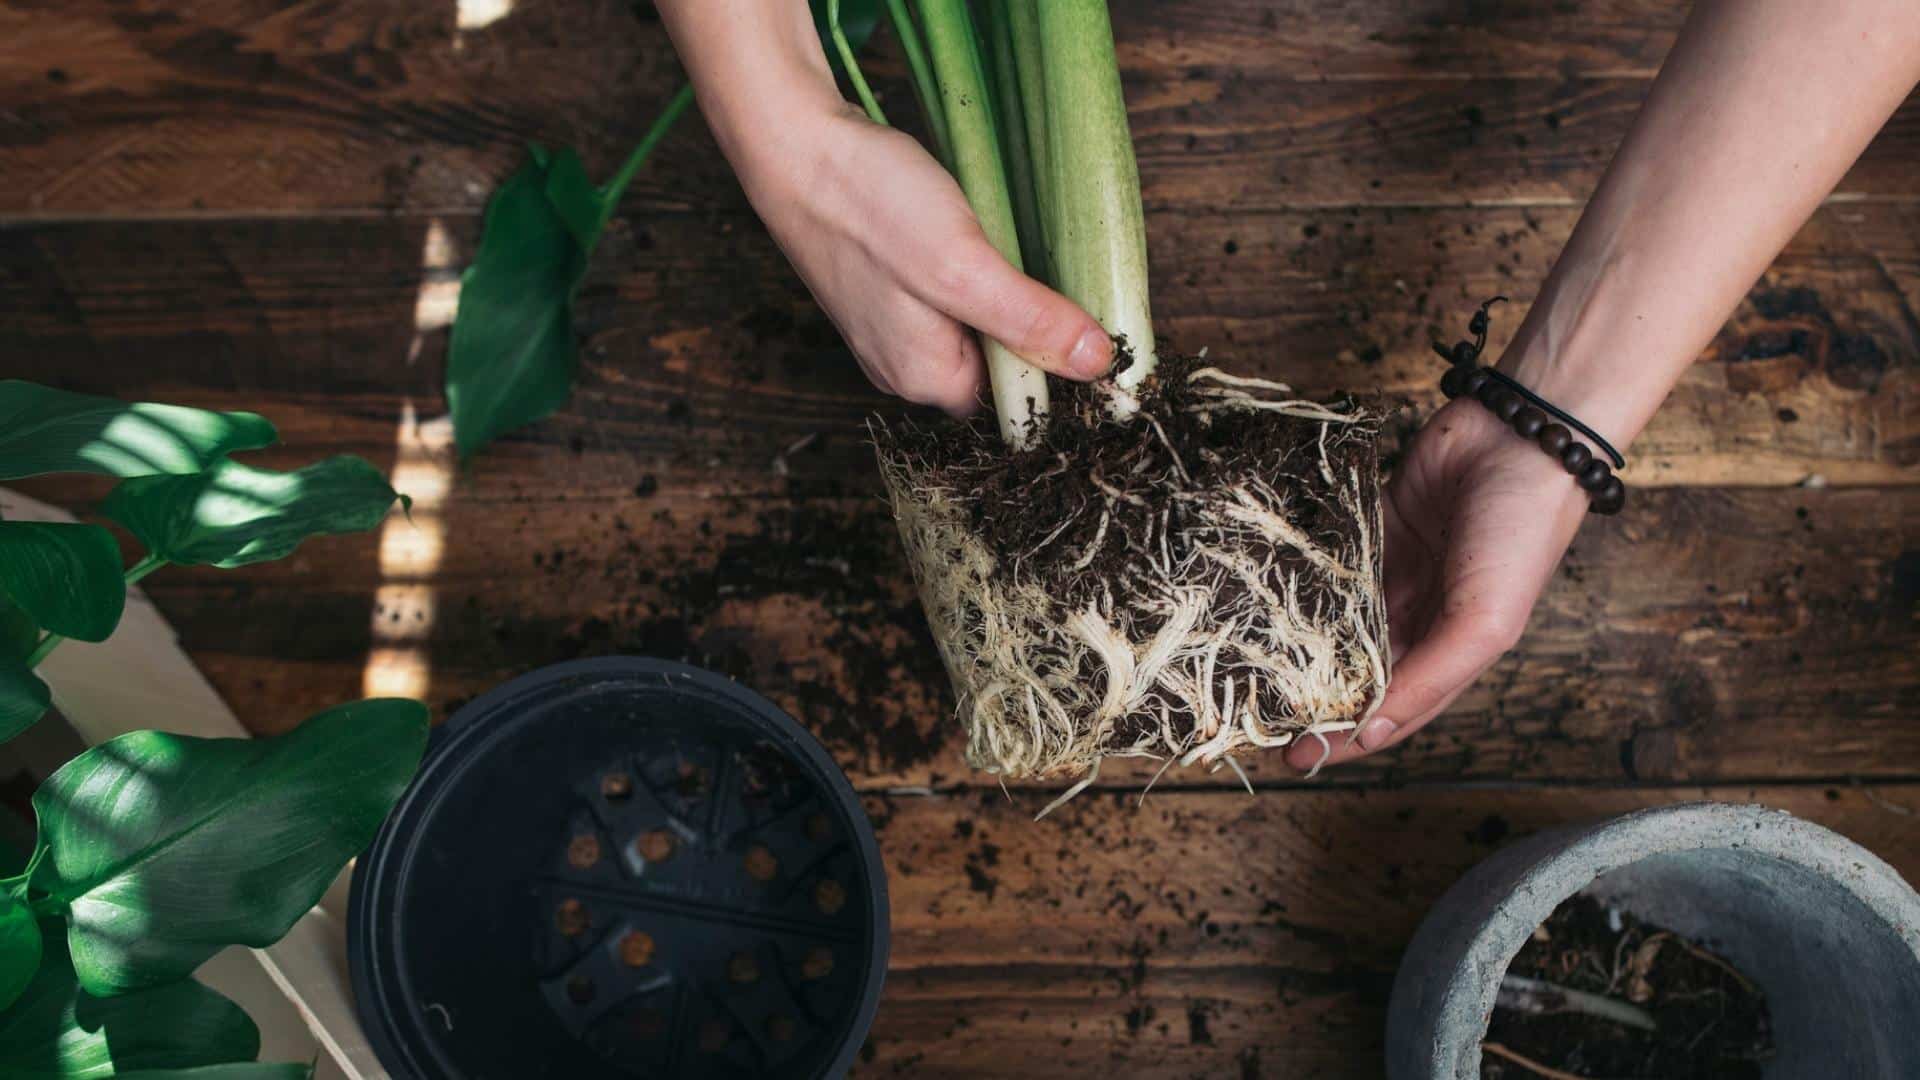 A birds-eye view shows a pair of hands holding a de-potted plant with lots of roots, over a wooden table. The empty plant pot is to the side and there is soil on the table.